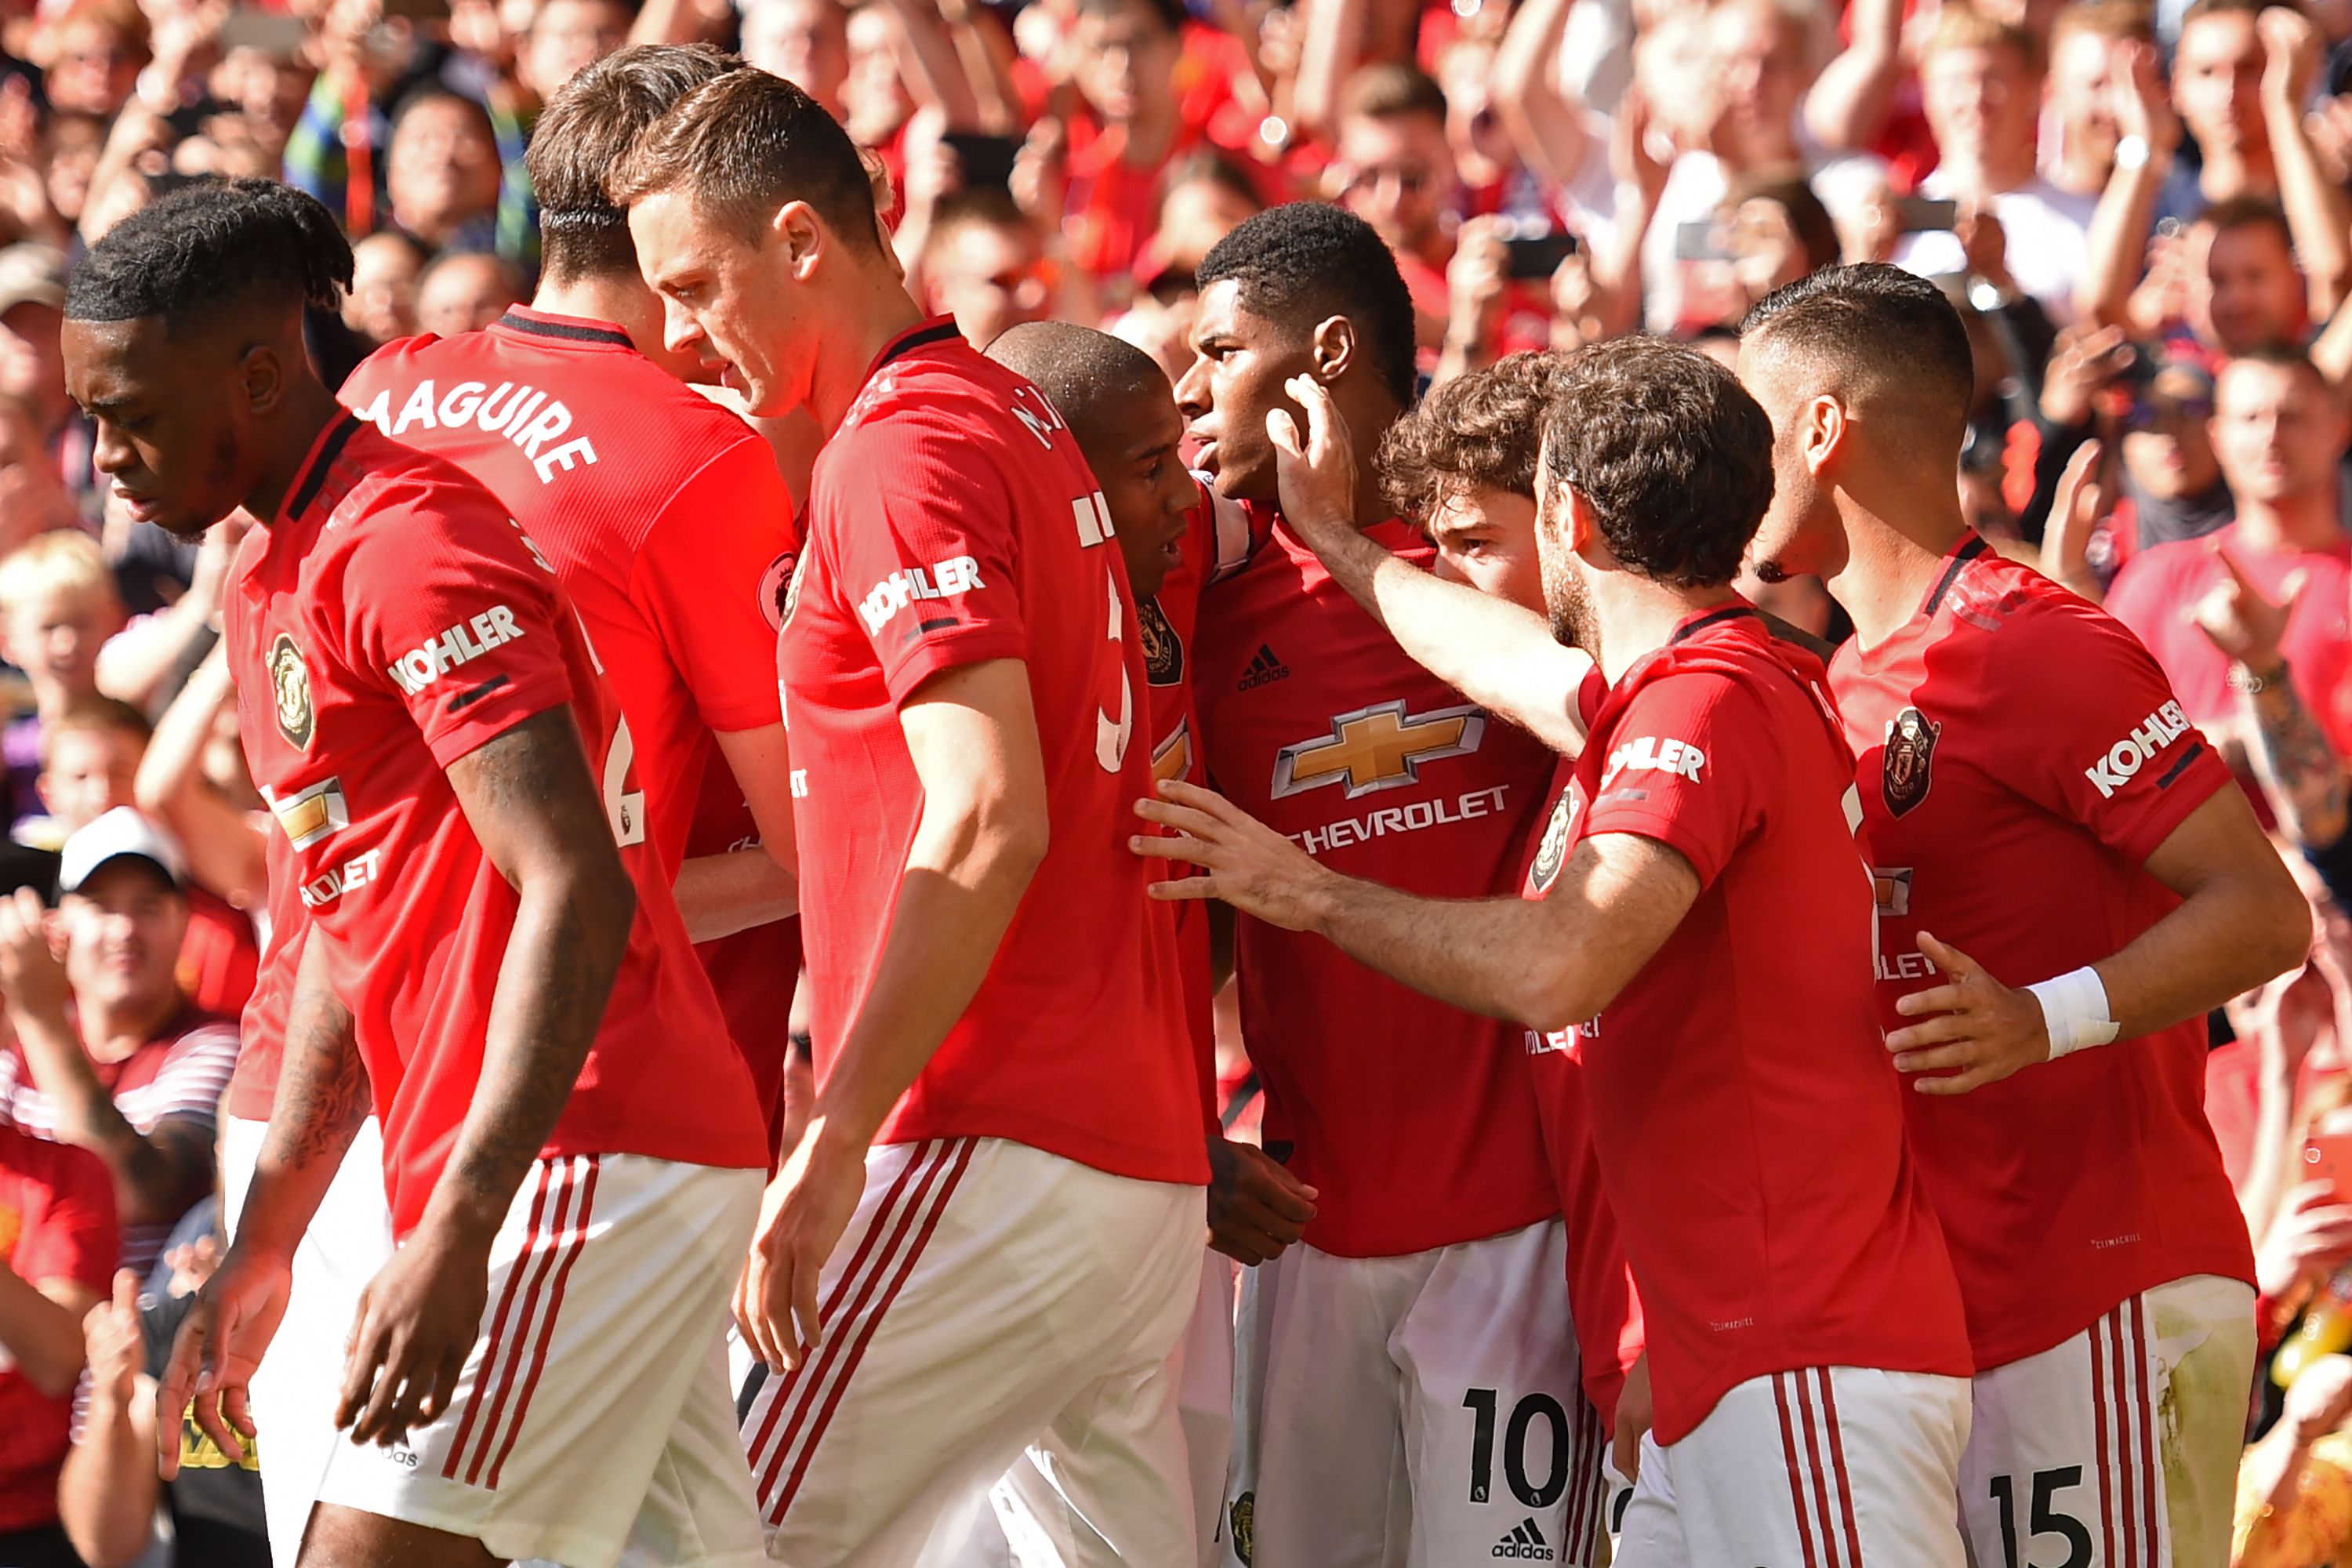 Manchester United's English striker Marcus Rashford (C) celebrates with teammates after scoring the opening goal of the English Premier League football match between Manchester United and Leicester City at Old Trafford in Manchester, north west England, on September 14, 2019. (Photo by Oli SCARFF / AFP) / RESTRICTED TO EDITORIAL USE. No use with unauthorized audio, video, data, fixture lists, club/league logos or 'live' services. Online in-match use limited to 120 images. An additional 40 images may be used in extra time. No video emulation. Social media in-match use limited to 120 images. An additional 40 images may be used in extra time. No use in betting publications, games or single club/league/player publications. /         (Photo credit should read OLI SCARFF/AFP/Getty Images)